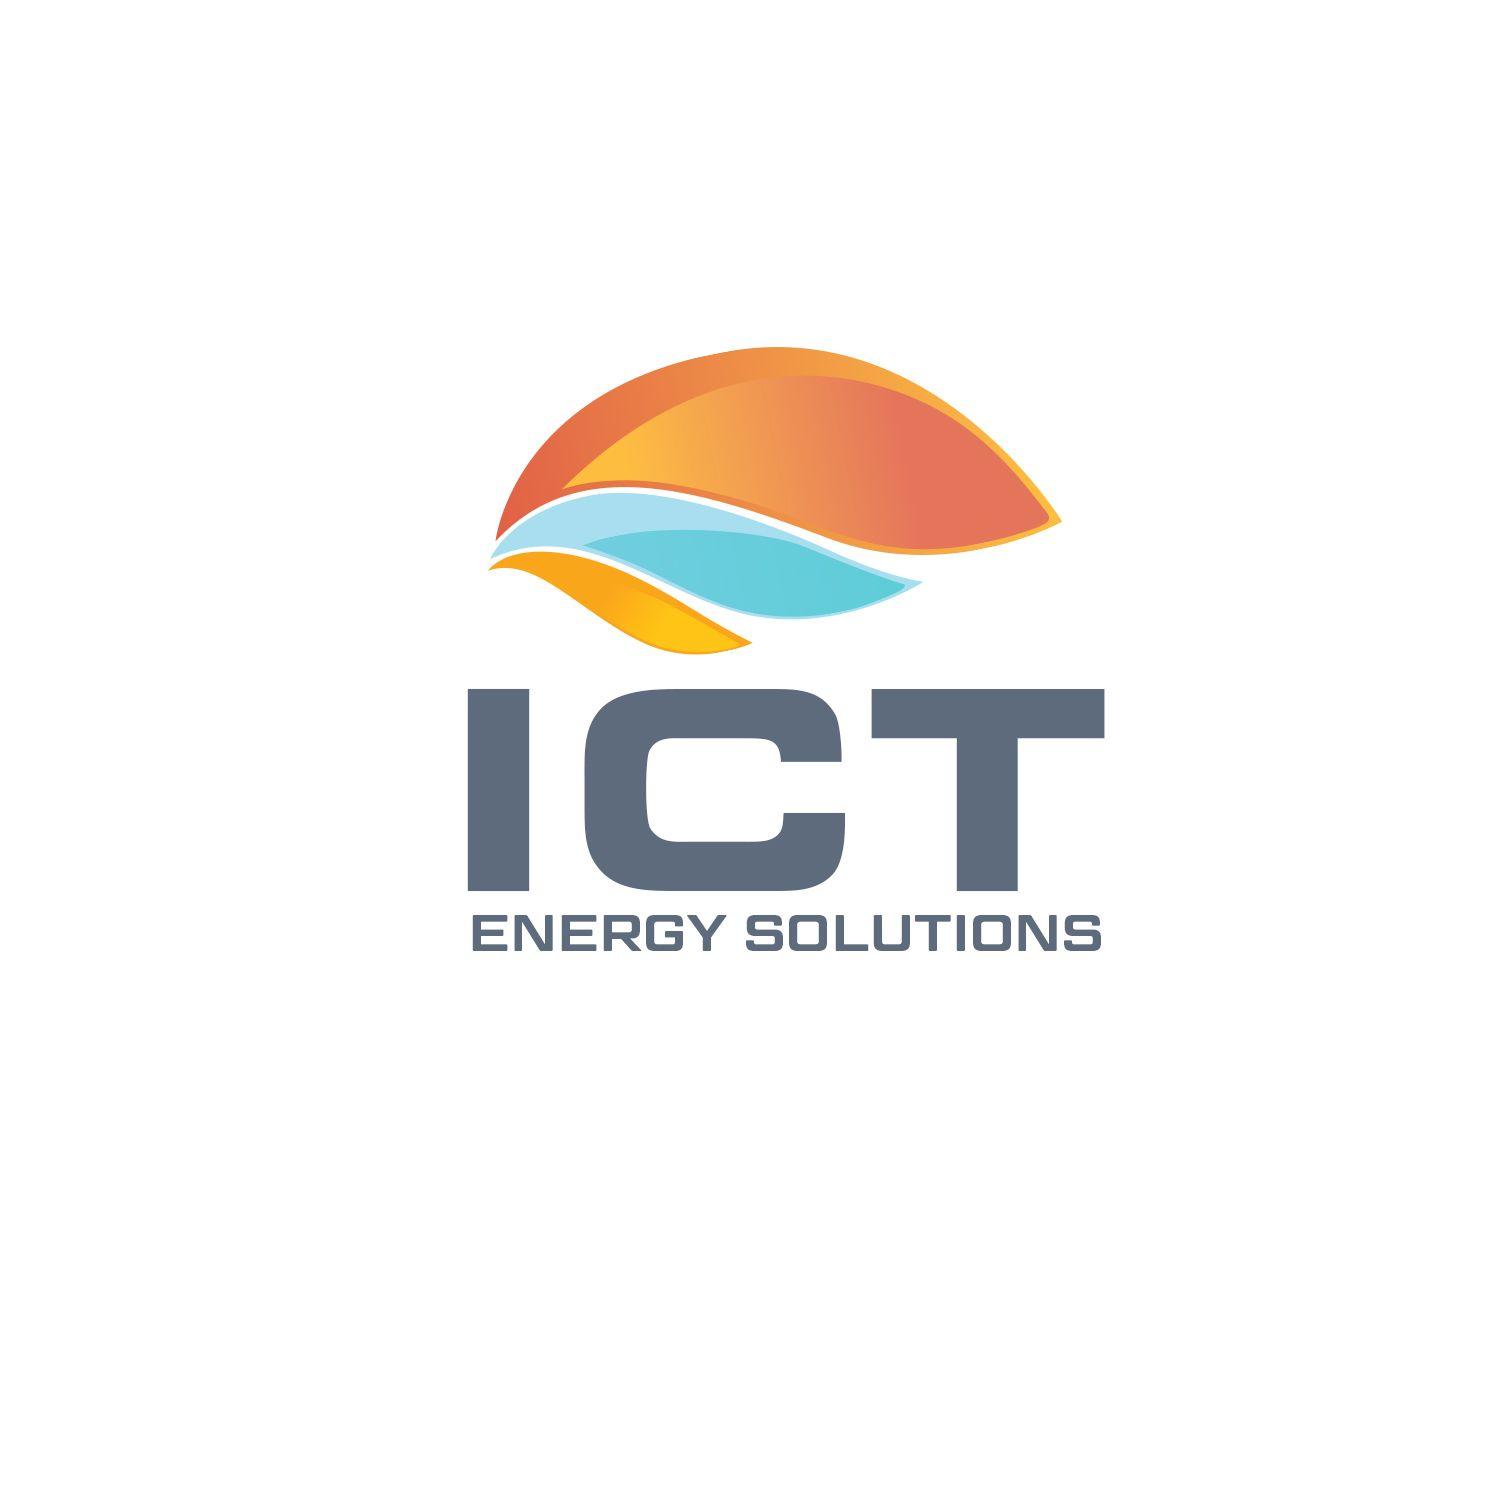 ICT Logo - Bold, Serious, Oil And Gas Logo Design for ICT Energy Solutions